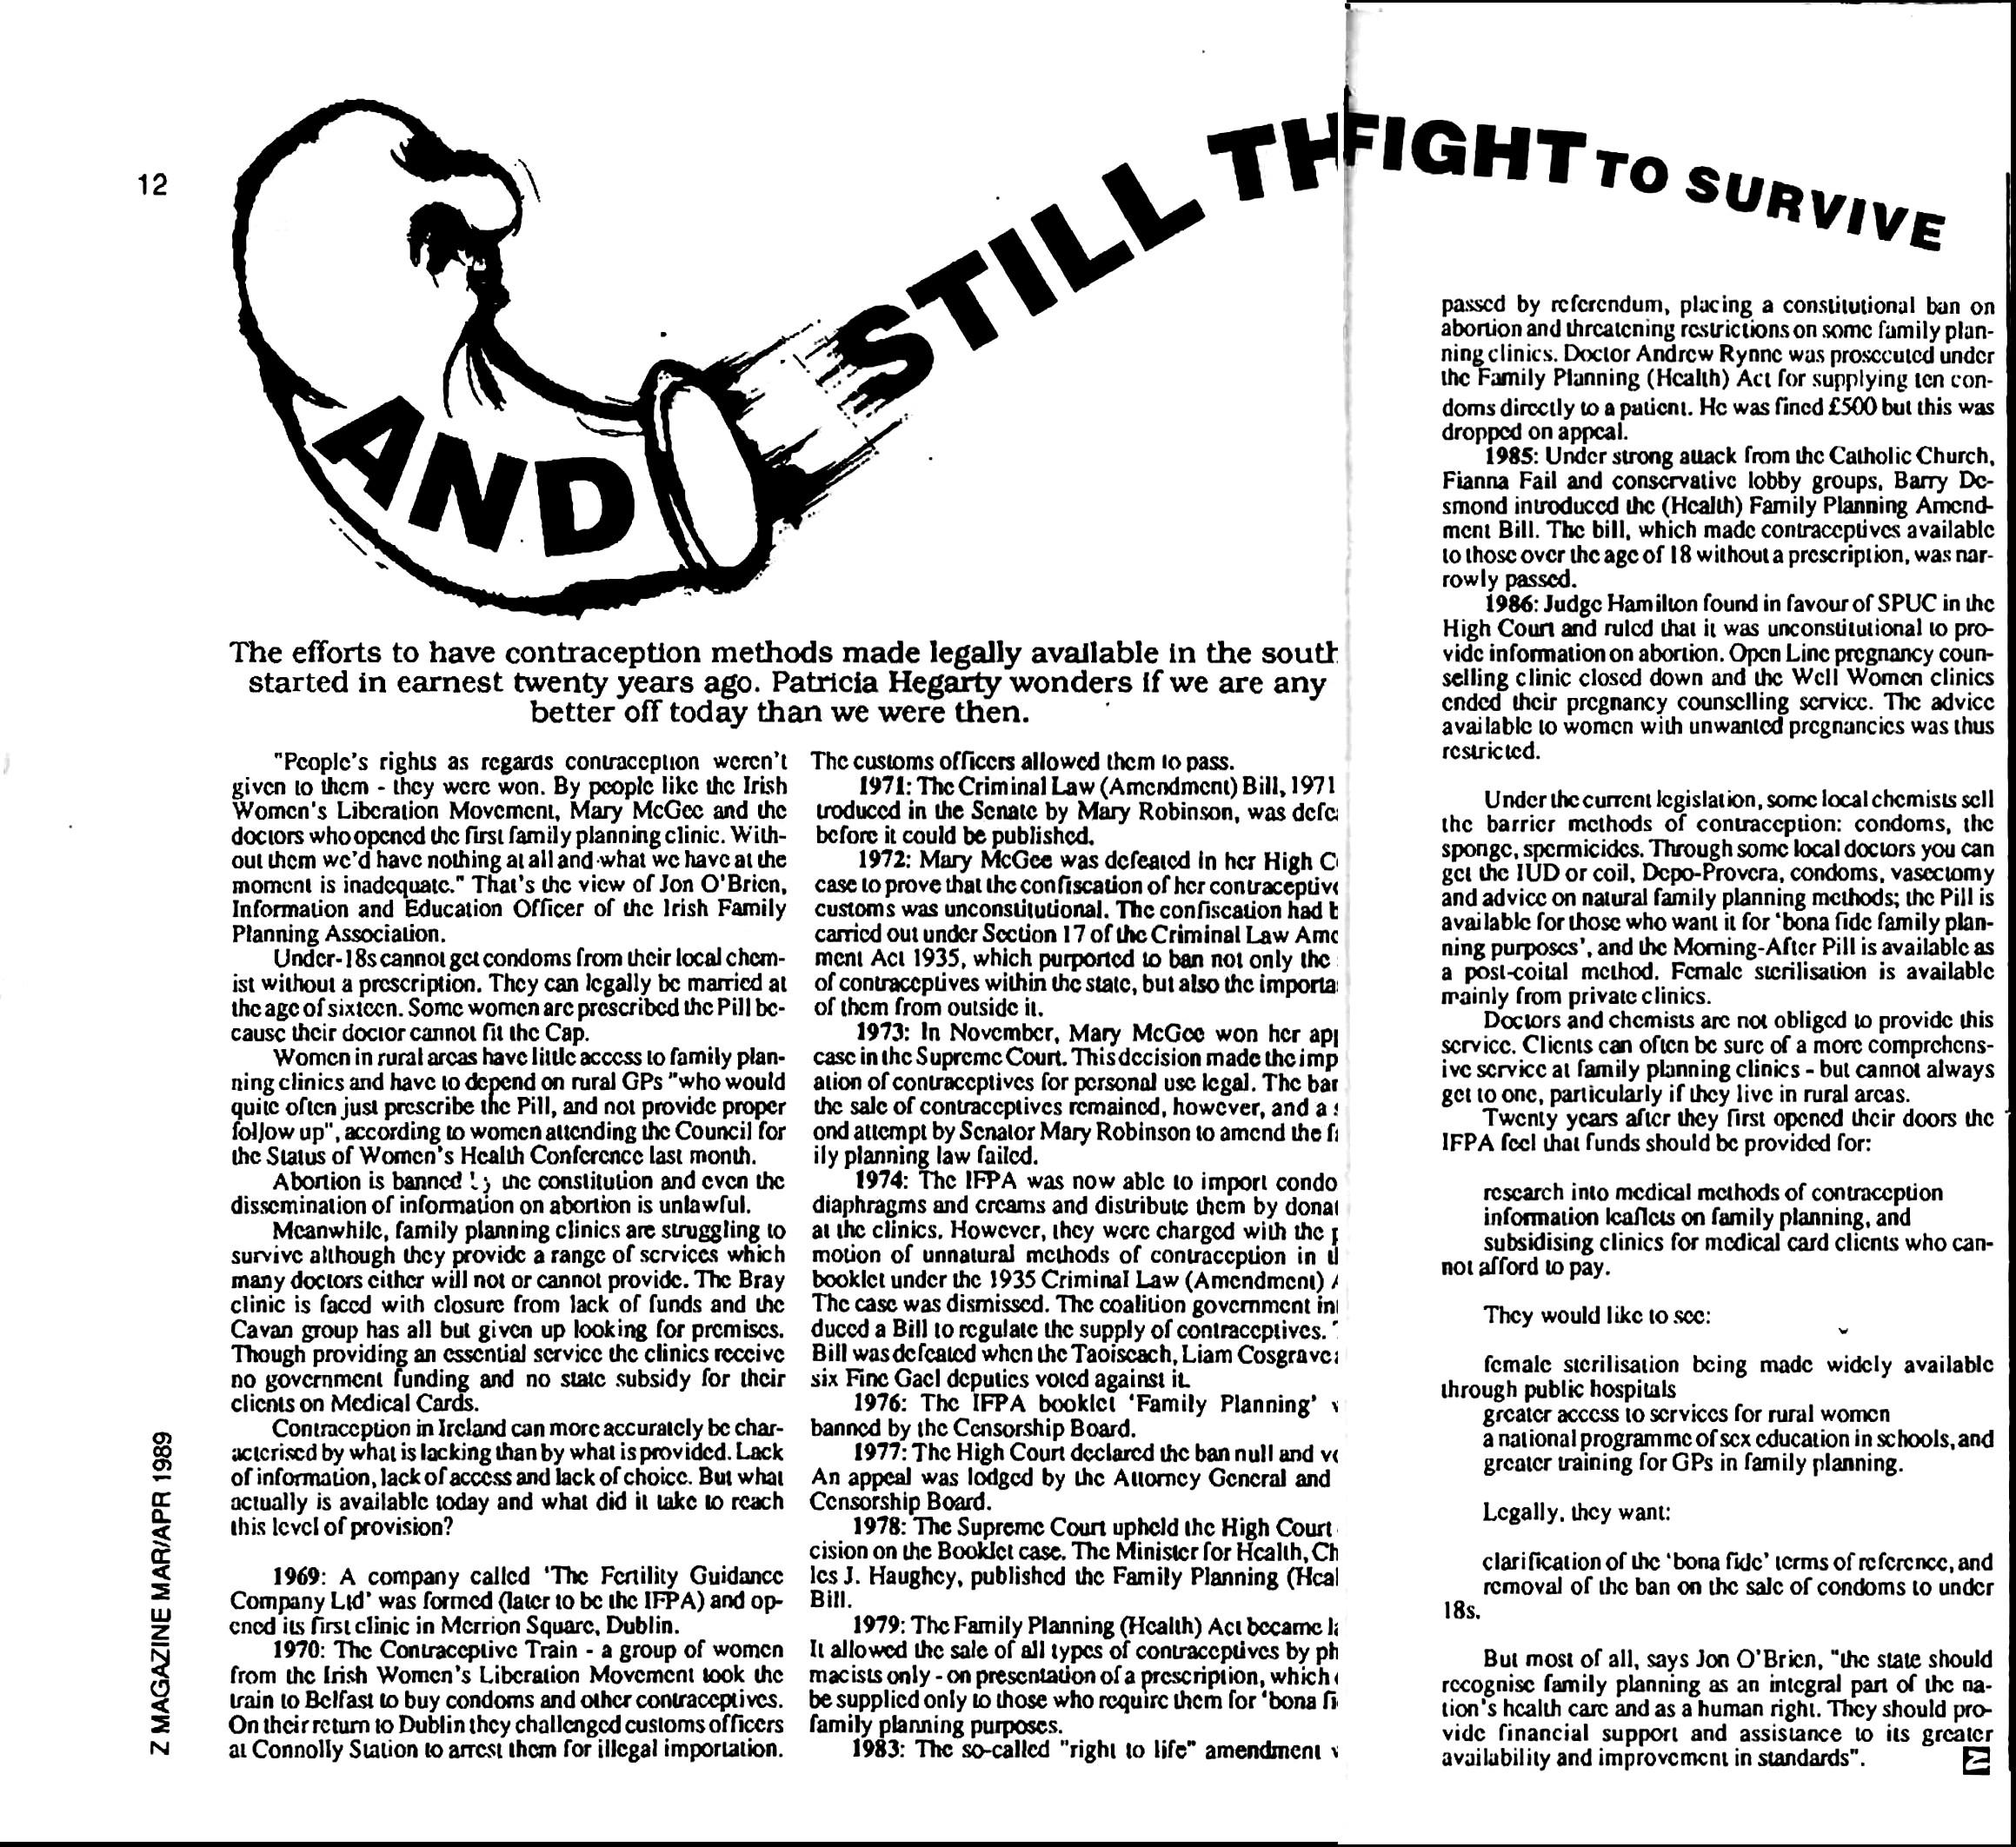 A scanned magazine article reading:

And Still They Fight To Survive

The efforts to have contraception methods made legally available in the south started in earnest twenty years ago. Patricia Hegarty wonders if we are any better off today than we were then.

"People's rights as regards contraception weren't given o them - they were won. By people like the Irish Women's Liberation Movement, Mary McGee and the doctors who opened the first family planning clinic. Without them we'd have nothing at all and -what we have at the moment is inadequate.” That's the view of Jon O'Brien, Information and Education Officer of the Irish Family Planning Association.

Under-18s cannot get condoms from their local chemist without a prescription. They can legally be married at the age of sixteen. Some women are prescribed the Pill because their doctor cannot fit the Cap.

Women in rural areas have little access to family planning clinics and have to depend on rural GPs "who would quite often just prescribe the Pill, and not provide proper follow up", according to women attending the Council for the Status of Women’s Health Conference last month.

Abortion is banned [in] the constitution and even the dissemination of information on abortion is unlawful.

Meanwhile, family planning clinics are struggling to survive although they provide a range of services which many doctors cither will not or cannot provide. The Bray clinic is faced with closure from lack of funds and the Cavan group has all but given up looking for premises.
Though providing an essential service the clinics receive no government funding and no state subsidy for their clients on Medical Cards.

Contraception in Ireland can more accurately be characterised by what is lacking than by what is provided. Lack of information, lack of access and lack of choice. But what actually is available today and what did it lake 1o reach this level of provision?

1969: A company called ‘The Fertility Guidance
Company Ltd’ was formed (later to be the IFPA) and opened its first clinic in Merrion Square, Dublin.

1970: The Contraceptive Train - a group of women
from the Irish Women’s Liberation Movement took the train to Belfast o buy condoms and other contraceptives. On their return to Dublin they challenged customs officers at Connolly Station to arrest them for illegal importation. The customs officers allowed them 10 pass.

1971: The Criminal Law (Amendment) Bill, 1971
introduced in the Senate by Mary Robinson, was defeated before it could be published.

1972: Mary McGee was defeated in her High Court
case to prove that the confiscation of her contraceptives by customs was unconstitutional. The confiscation had been carried out under Section 17 of the Criminal Law Amendment Act 1935, which purported to ban not only the [sale]
of contraceptives within the state, but also the importation of them from outside it.

1973: In November, Mary McGee won her ap[peal]
case in the Supreme Court. This decision made the importation of contraceptives for personal use legal. The bar [on] the sale of contraceptives remained, however, and a second attempt by Senator Mary Robinson to amend the family planning law failed.

1974: The IFPA was now able to import condoms, 
diaphragms and creams and distribute them by dona[tion] at the clinics. However, they were charged with the promotion of unnatural methods of contraception in [a] booklet under the 1935 Criminal Law (Amendment) [Act]. The case was dismissed. The coalition government introduced a Bill to regulate the supply of contraceptives.
[The] Bill was defeated when the Taoiseach, Liam Cosgrave, [and] six Fine Gael deputies voted against it.

1976: The IFPA booklet ‘Family Planning’ [was]
banned by the Censorship Board.

1977: The High Court declared the ban null and [void]. An appeal was lodged by the Attorney General and [the] Censorship Board.

1978: The Supreme Court upheld the High Court
decision on the Booklet case. The Minister for Health, Charles J. Haughey, published the Family Planning (Health) Bill.

1979: The Family Planning (Health) Act became [law]. It allowed the sale of all types of contraceptives by pharmacists only - on presentation of a prescription, which
be supplicd only to those who require them for ‘bona fide' family planning purposes.

1983: The so-called "right to life” amendment [was] passed by referendum, placing a constitutional ban on abortion and threatening restrictions on some family planning clinics. Doctor Andrew Rynne was prosecuted under the Family Planning (Health) Act for supplying ten condoms directly to a patient. He was fined £500 but this was dropped on appeal.

1985: Under strong attack from the Catholic Church, Fianna Fail and conservative lobby groups, Barry Desmond introduced the (Health) Family Planning Amendment Bill. The bill, which made contraceptives available to those over the age of 18 without a prescription, was narrowly passed.

1986: Judge Hamilton found in favour of SPUC in the High Court and ruled that it was unconstitutional to provide information on abortion. Open Line pregnancy counselling clinic closed down and the Well Women clinics ended their pregnancy counselling service. The advice available to women with unwanted pregnancies was thus restricted.

Under the current legislation, some local chemists sell the barrier methods of contraception: condoms, the sponge, spermicides. Through some local doctors you can get the IUD or coil, Depo-Provera, condoms, vasectomy and advice on natural family planning methods; the Pill is available for those who want it for ‘bona fide family planning purposes, and the Morning-After Pill is available as a post-coital method. Female sterilisation is available mainly from private clinics.

Doctors and chemists arc not obliged to provide this service. Clients can often be sure of a more comprehensive service at family planning clinics - but cannot always get to one, particularly if they live in rural areas.

Twenty years after they first opened their doors the IFPA feel that funds should be provided for:

"research into medical methods of contraception, information leaflets on family planning, and subsidising clinics for medical card clients who cannot afford to pay".

They would like to see:

"female sterilisation being made widely available through public hospitals; greater access to services for rural women; a national programme of sex education in schools, and greater training for GPs in family planning."

Legally, they want:

"clarification of the ‘bona fide’ terms of reference, and removal of the ban on the sale of condoms to under 18s."

But most of all, says Jon O'Brien, “the state should recognise family planning as an integral part of the nation's health care and as a human right. They should provide financial support and assistance lo its greater availability and improvement in standards”.